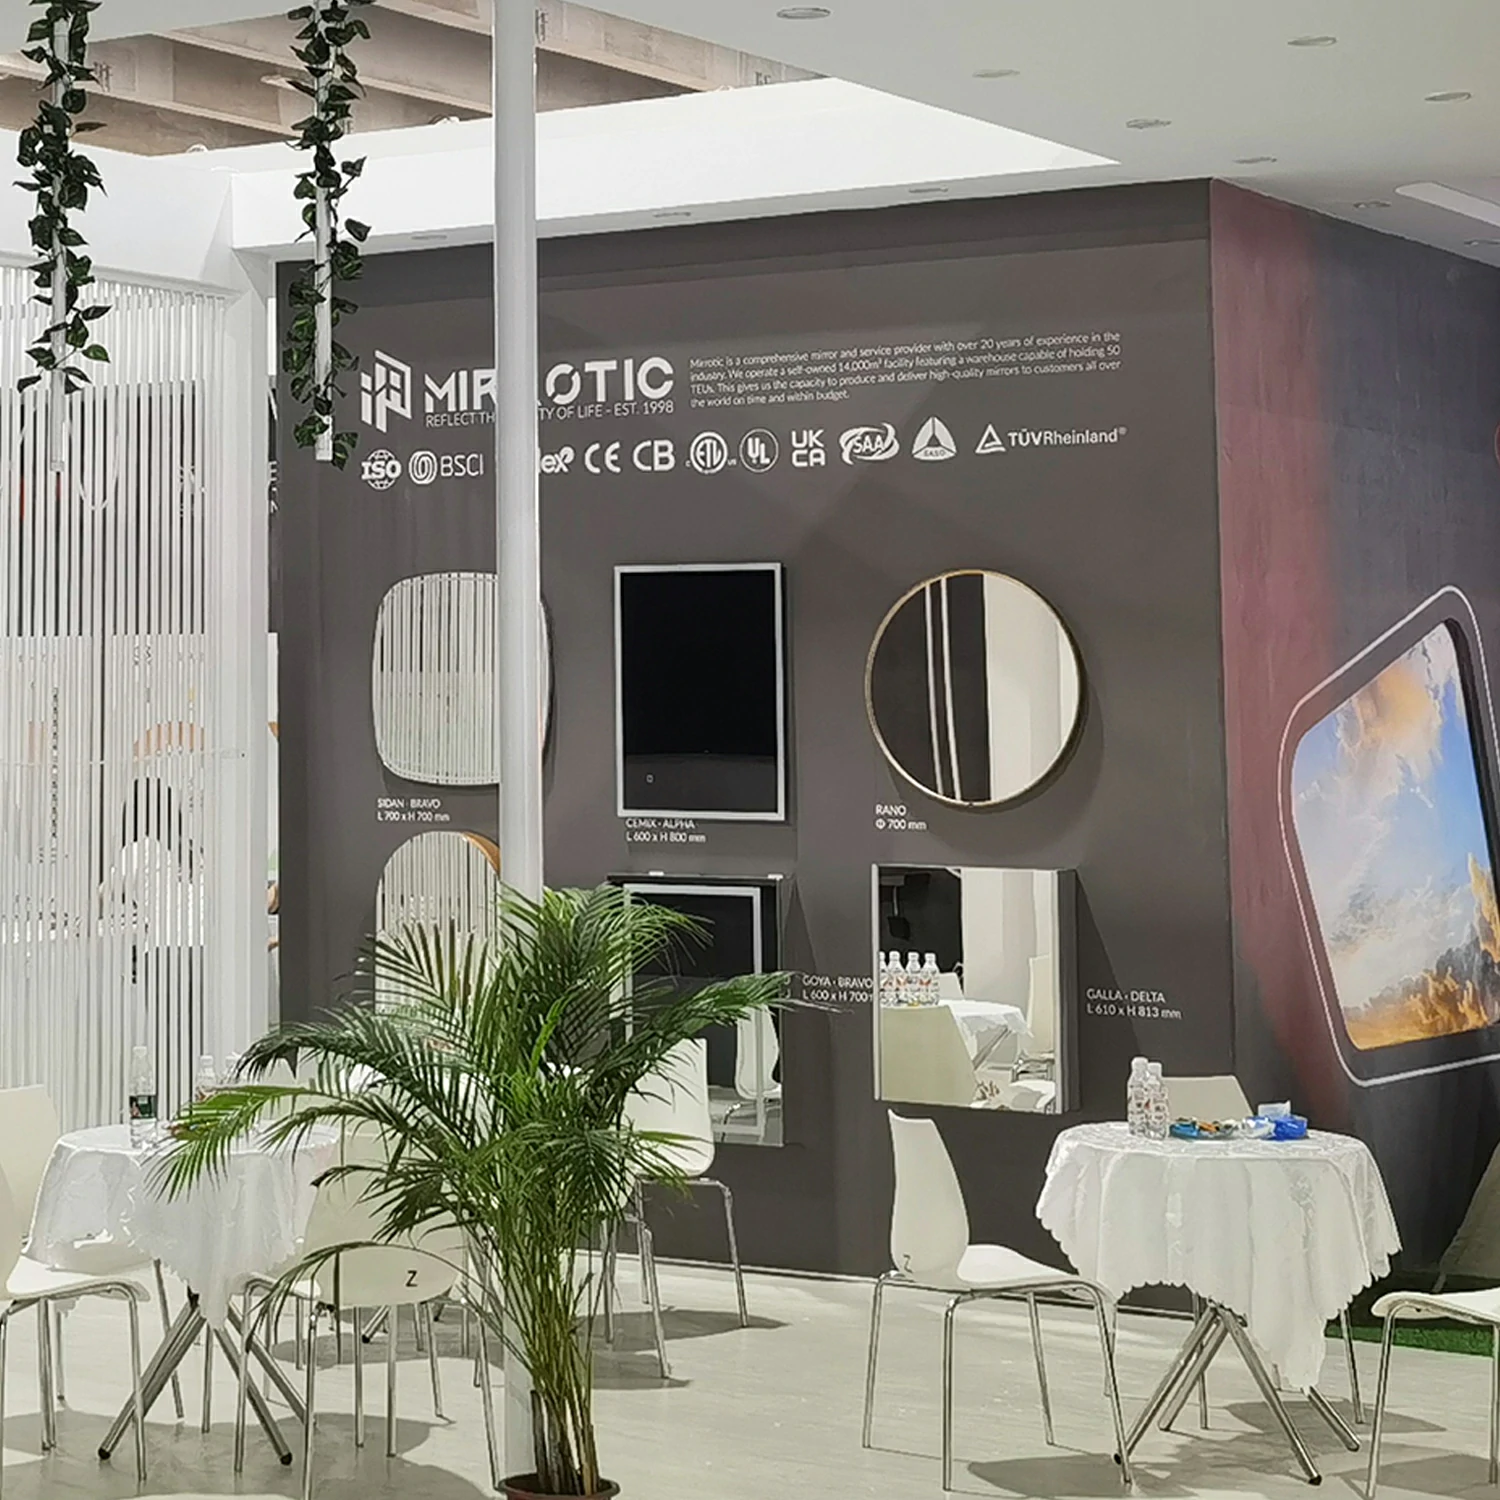 Successful Conclusion of the Guangzhou International Lighting Exhibition